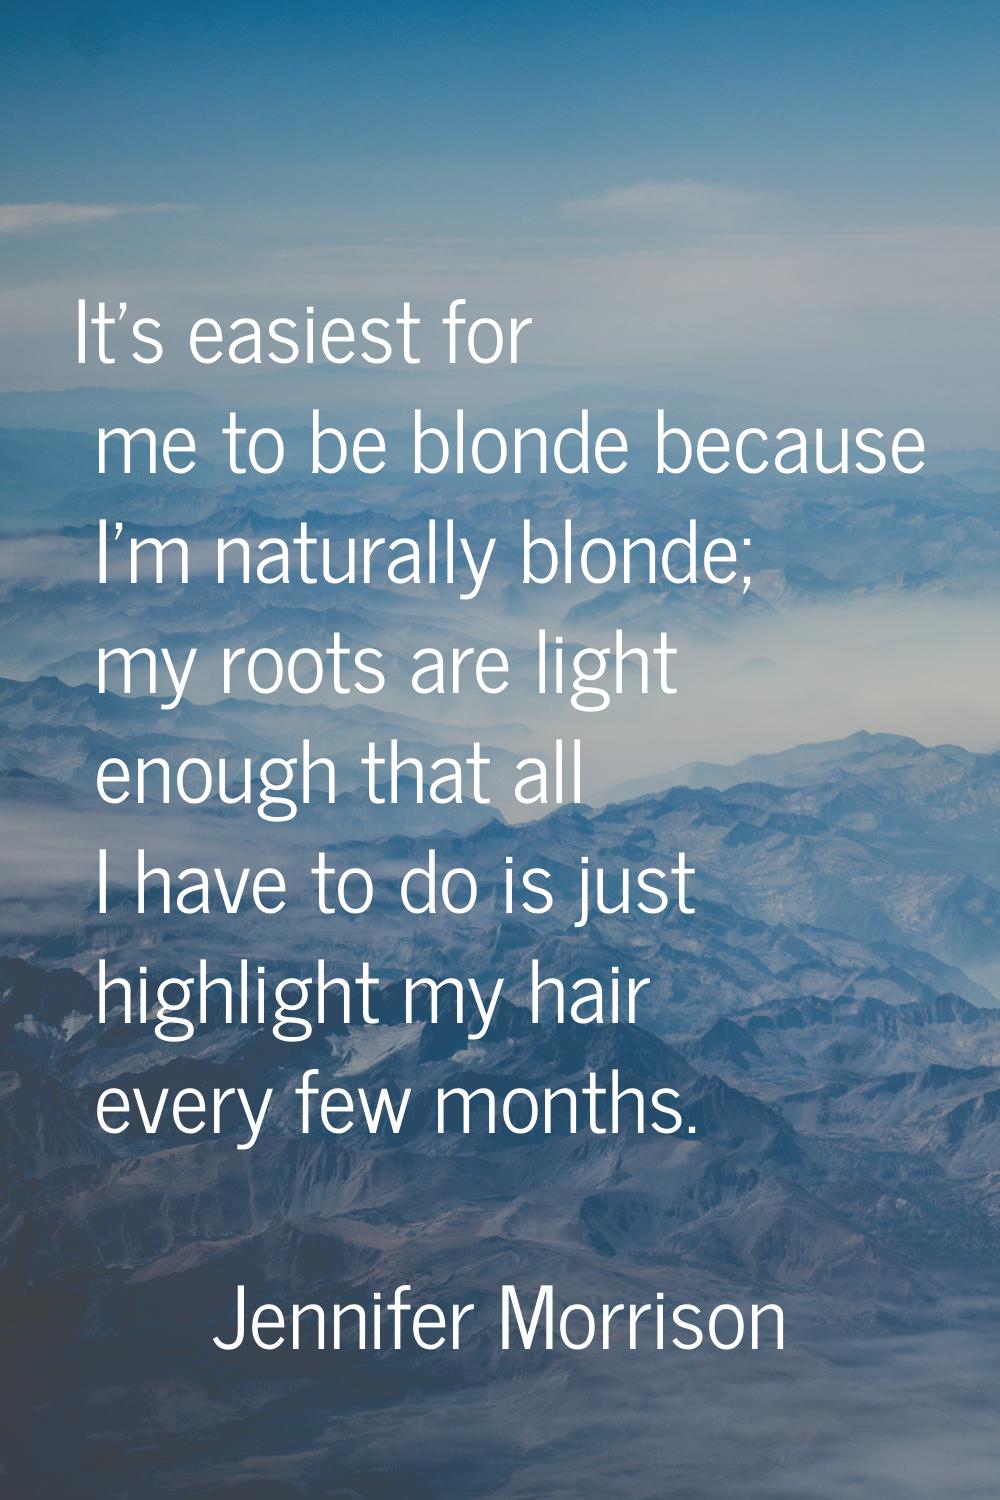 It's easiest for me to be blonde because I'm naturally blonde; my roots are light enough that all I